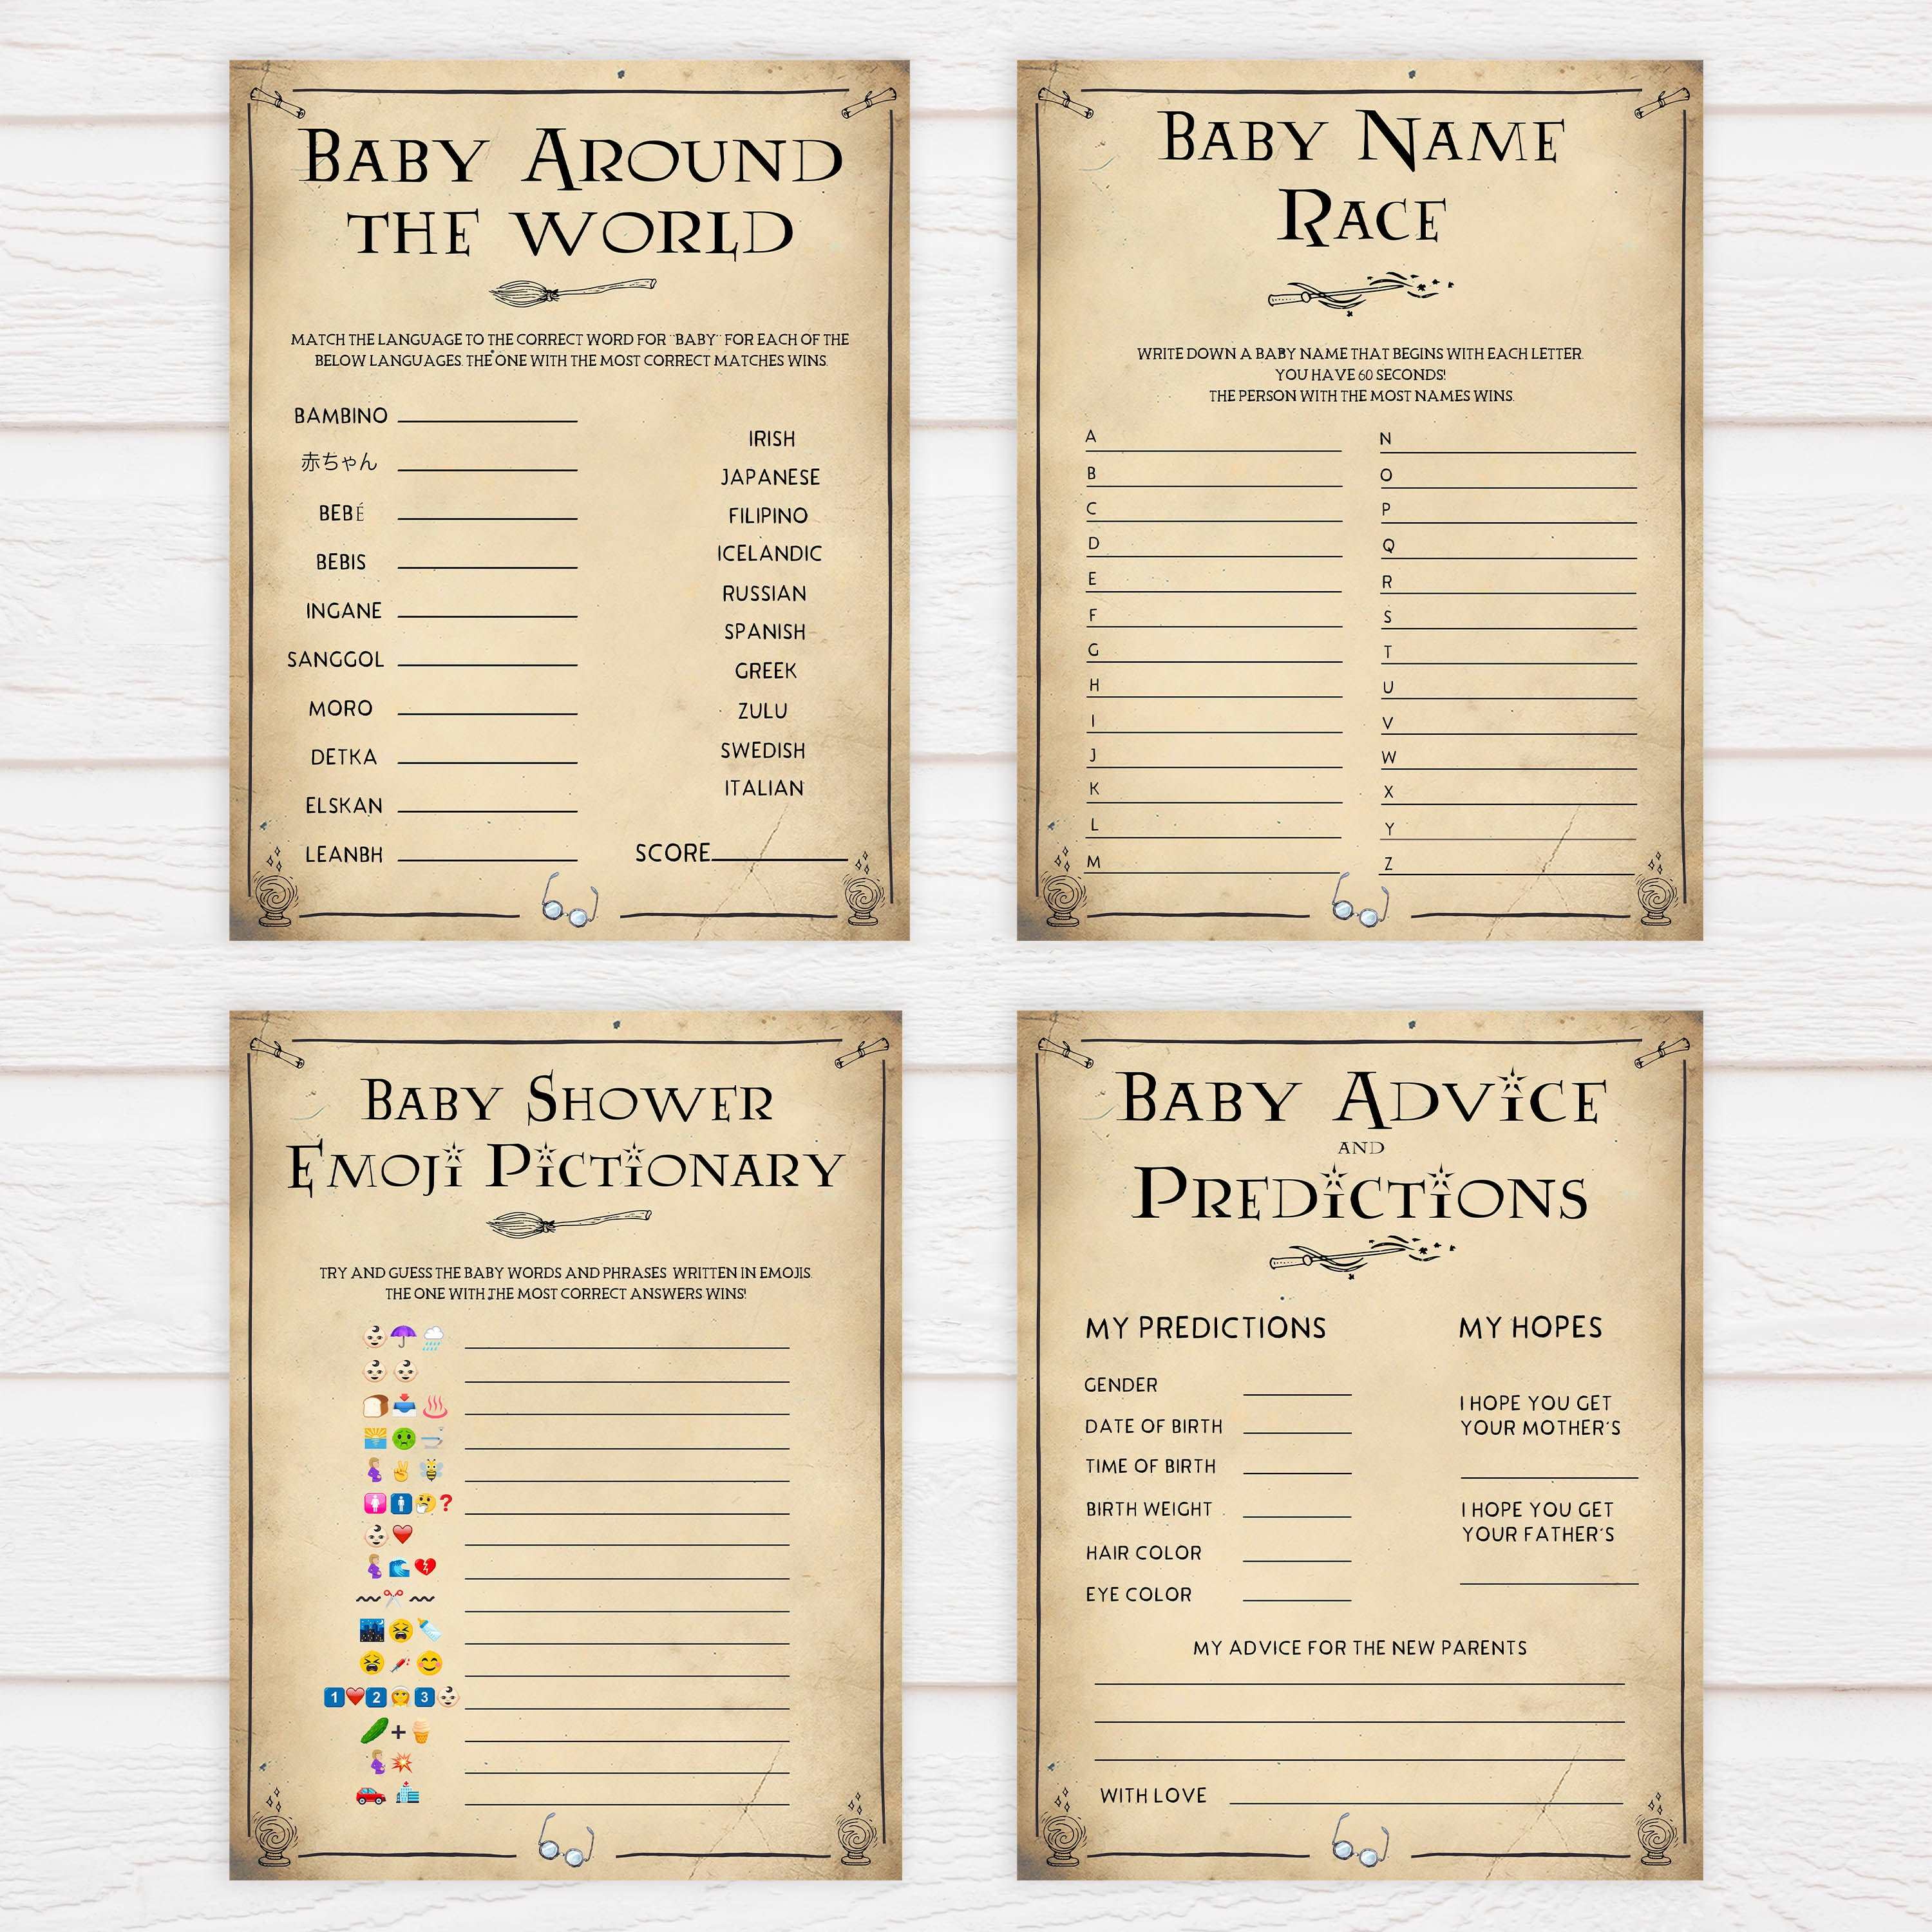 10 Wizard baby shower games, printable baby shower games, Harry Potter baby games, Harry Potter baby shower, fun baby shower games,  fun baby ideas